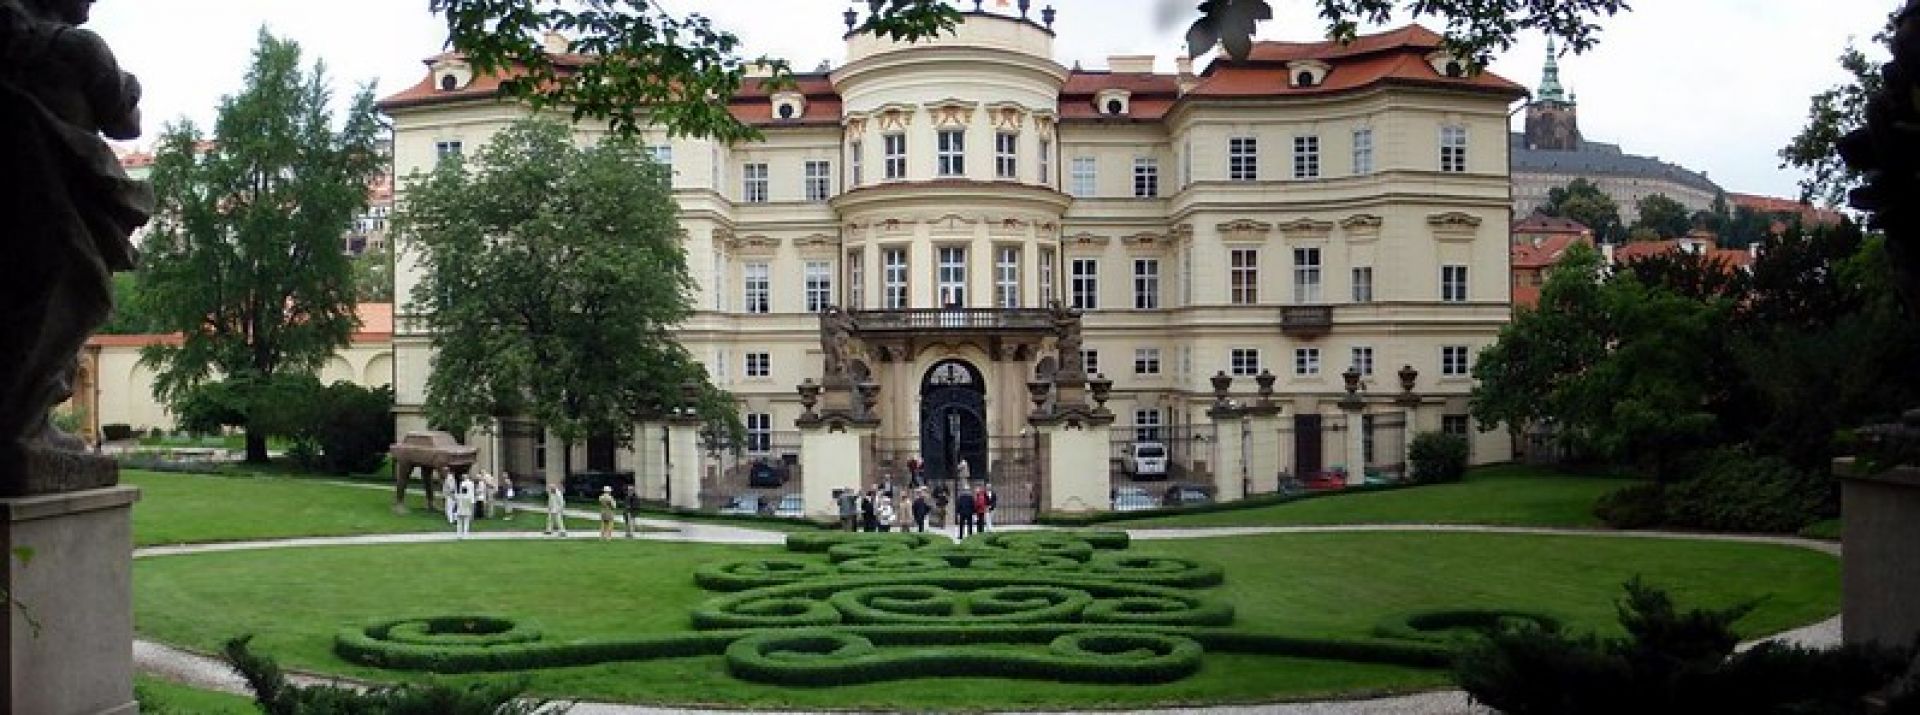 Lobkowicz Palace with Midday Concert